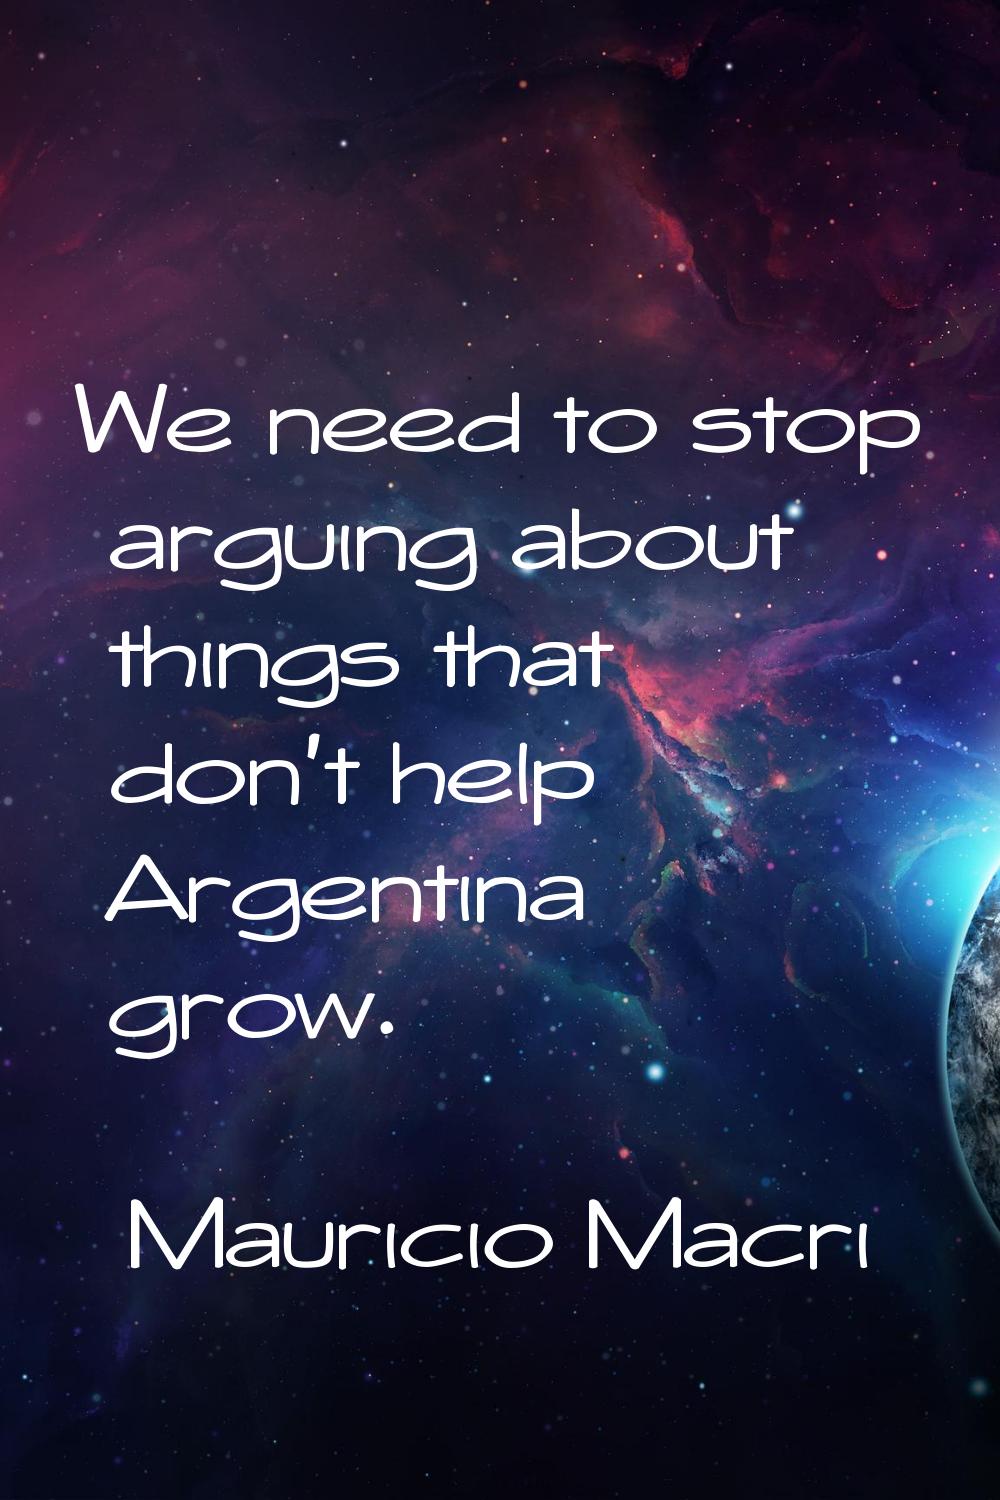 We need to stop arguing about things that don't help Argentina grow.